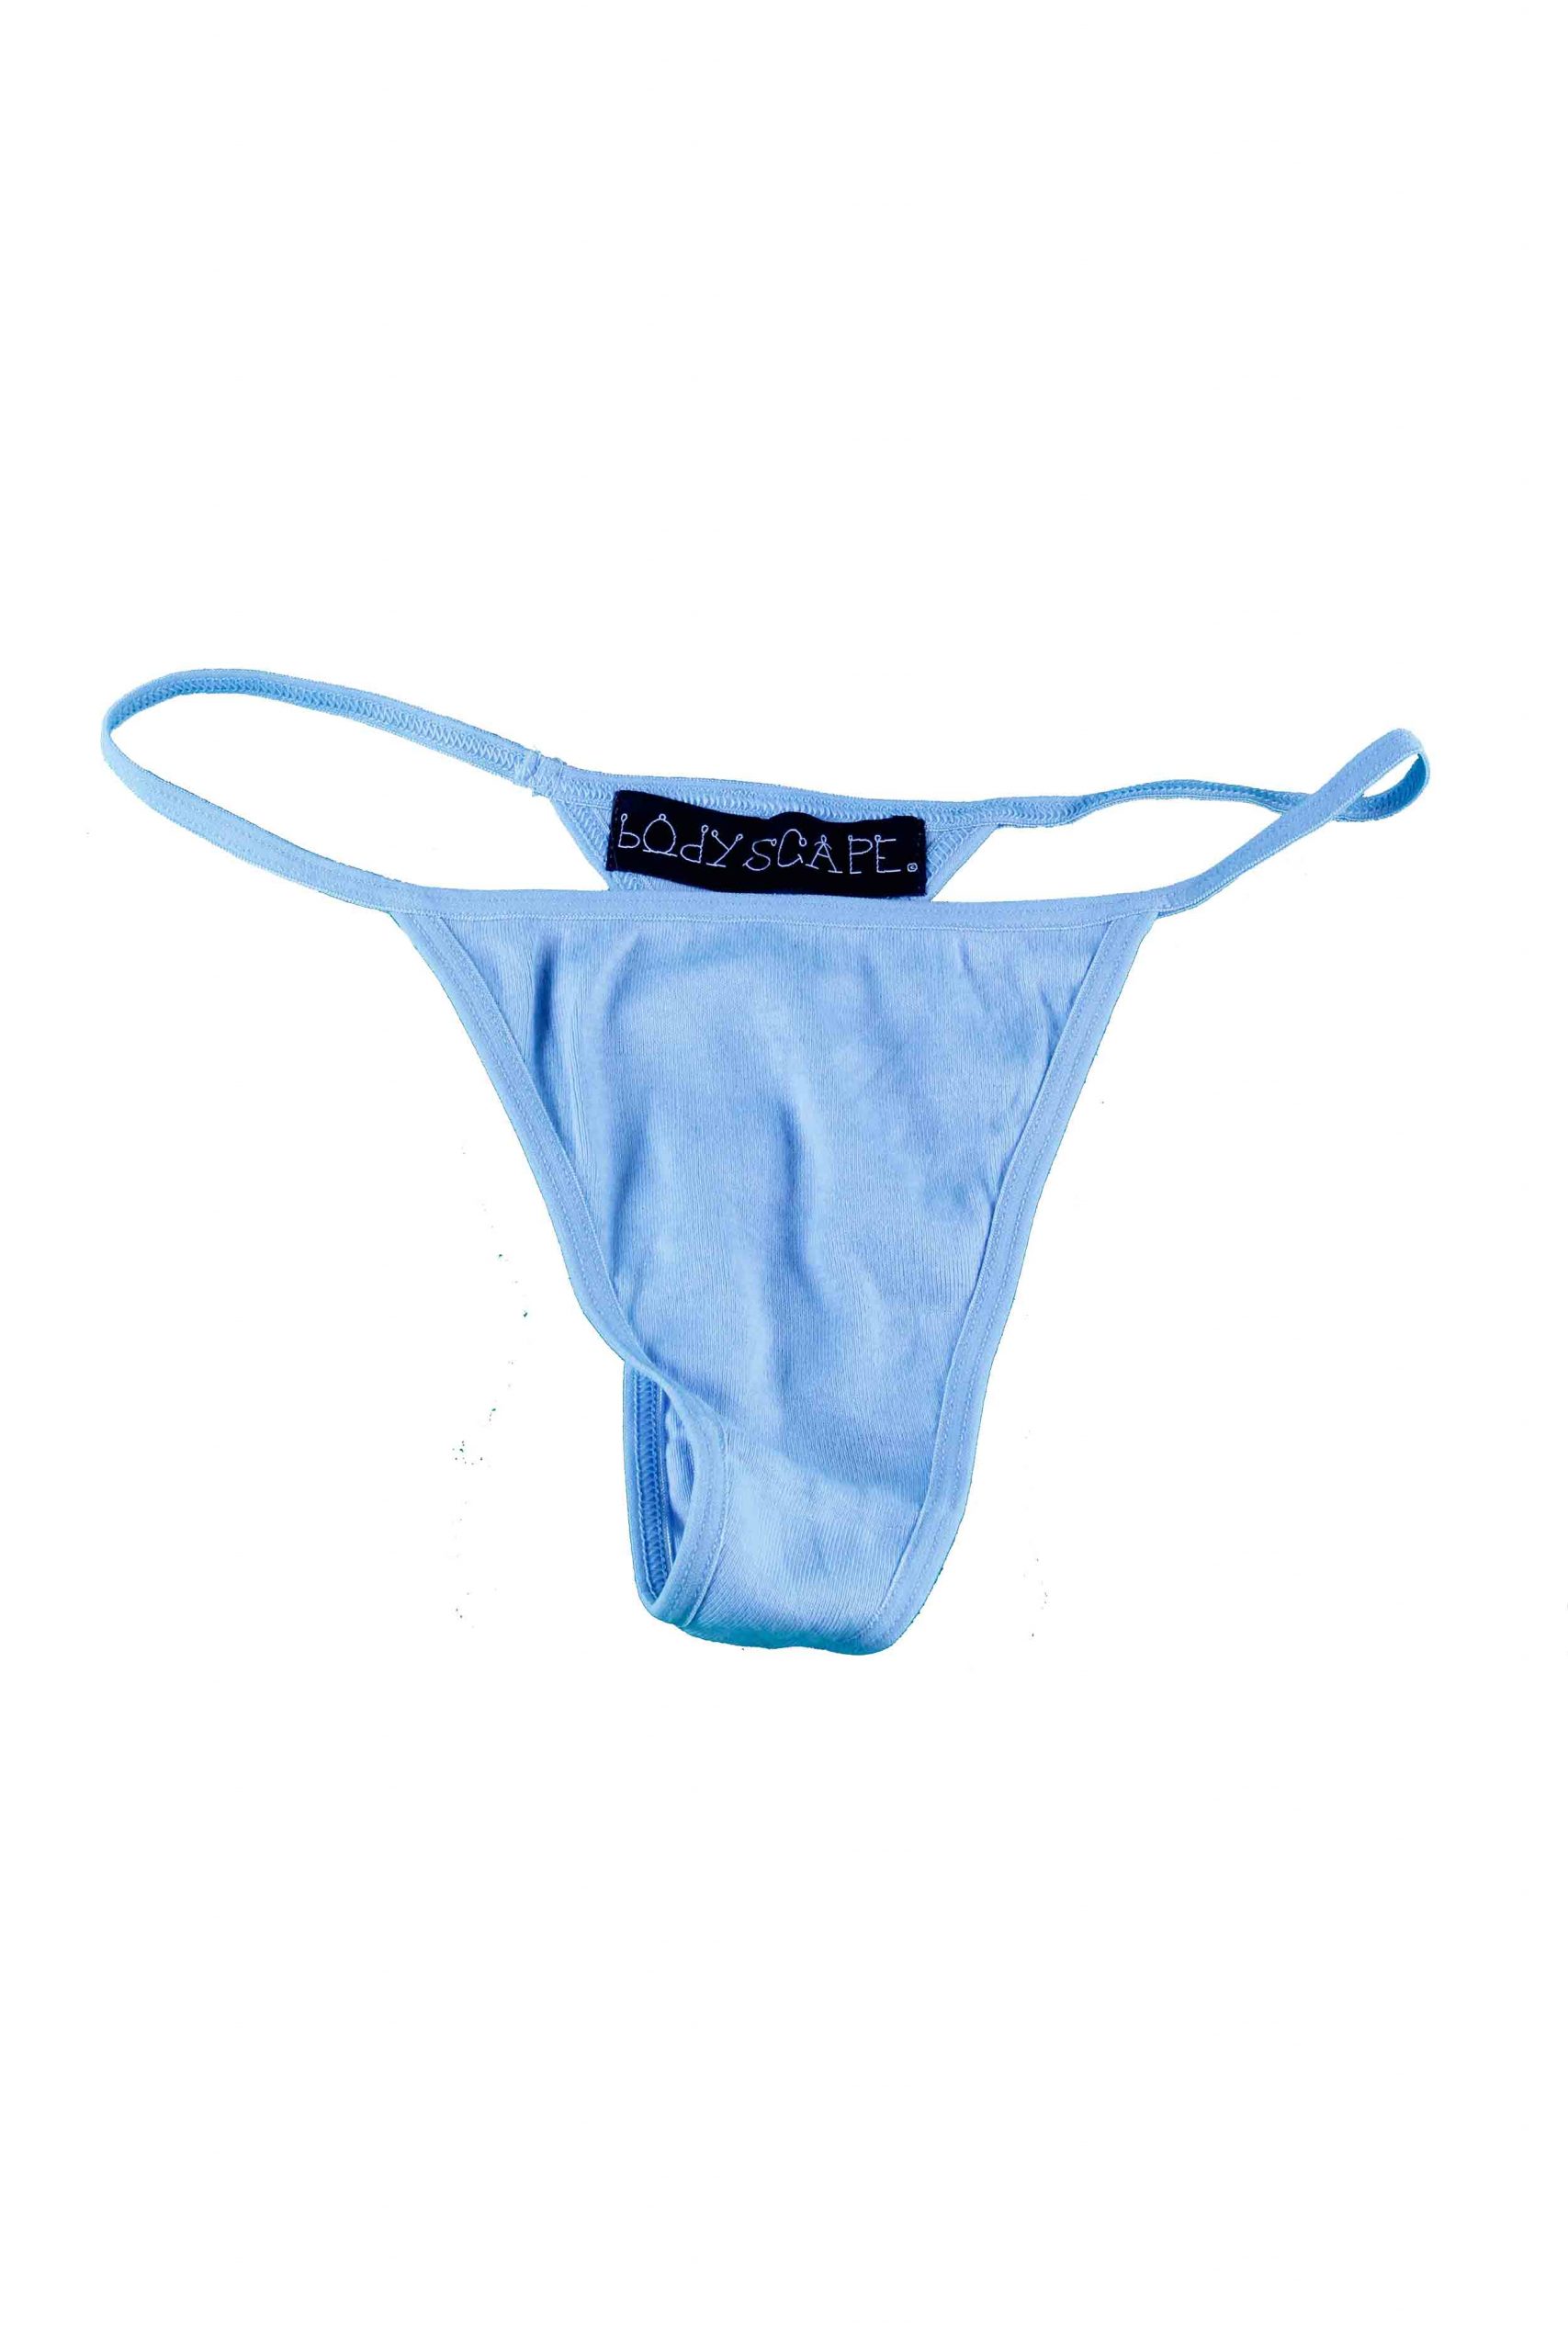 Baby Blue V-Back Thong - Bodyscape